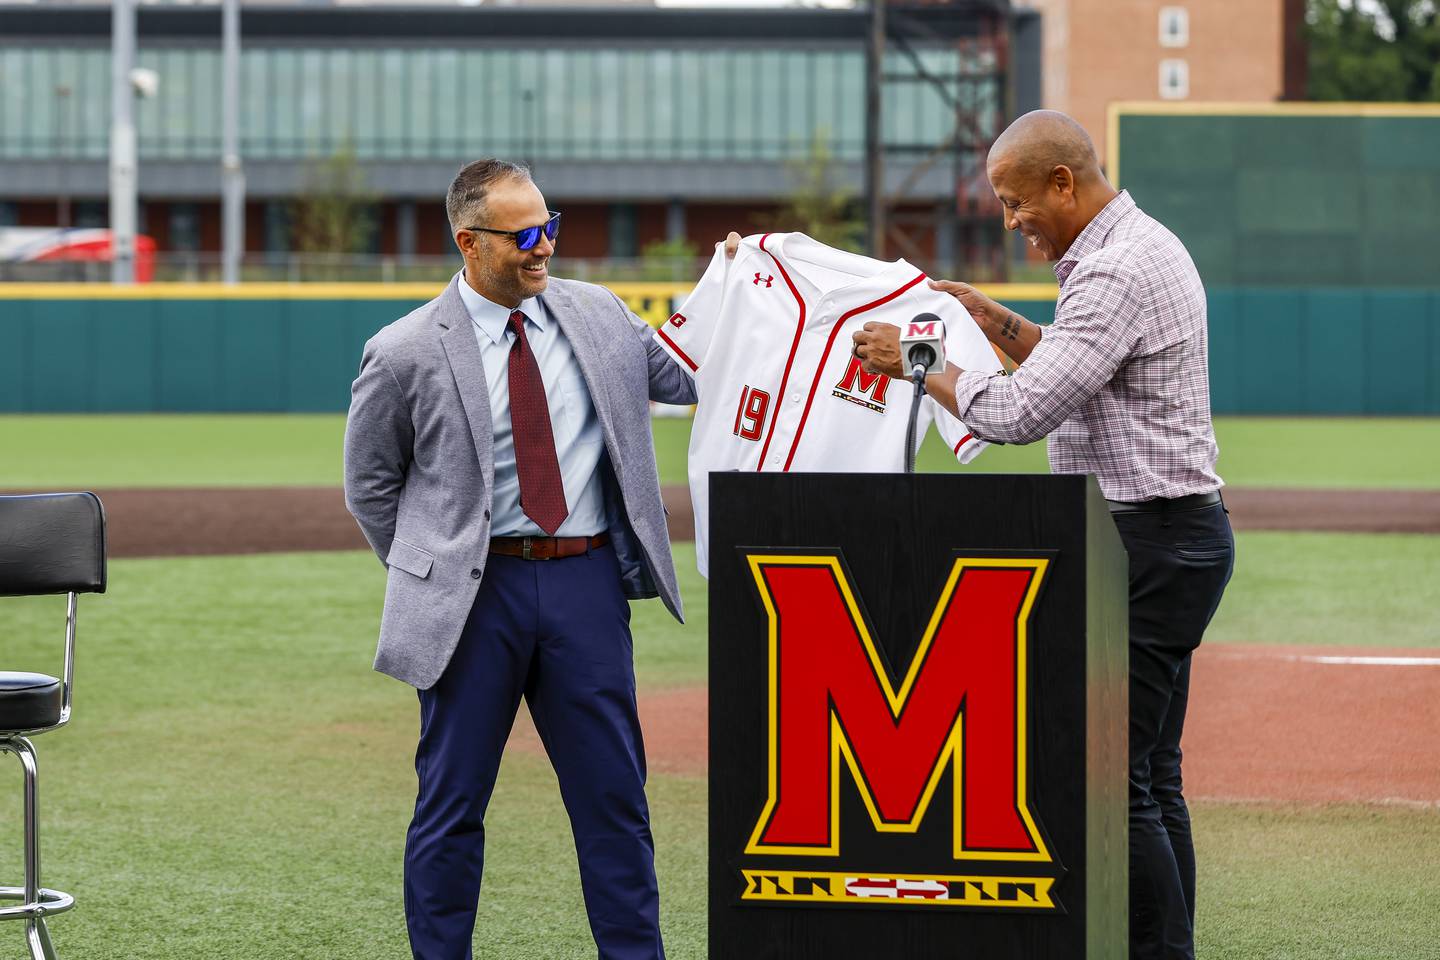 Matt Swope is the ninth head coach in the history of the University of Maryland baseball team.